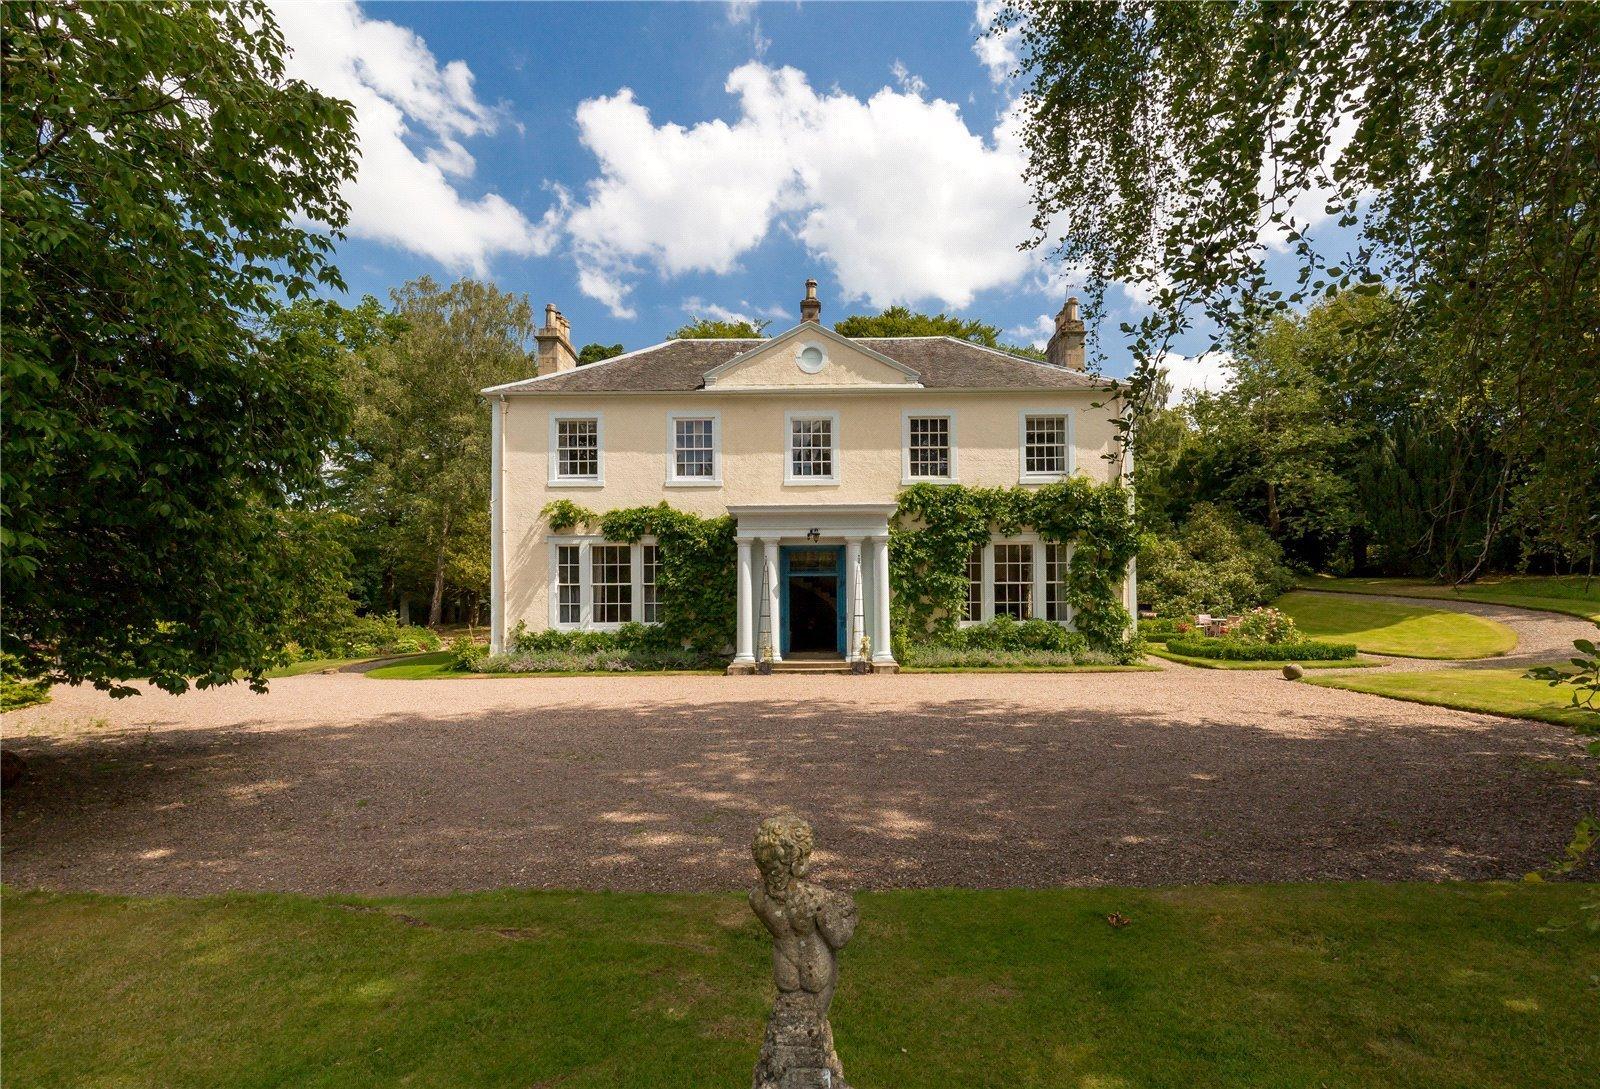 Offers over £1,500,000. More details at https://www.zoopla.co.uk/for-sale/details/53052481?search_identifier=6a856ba437d6a2980733b44c11265674